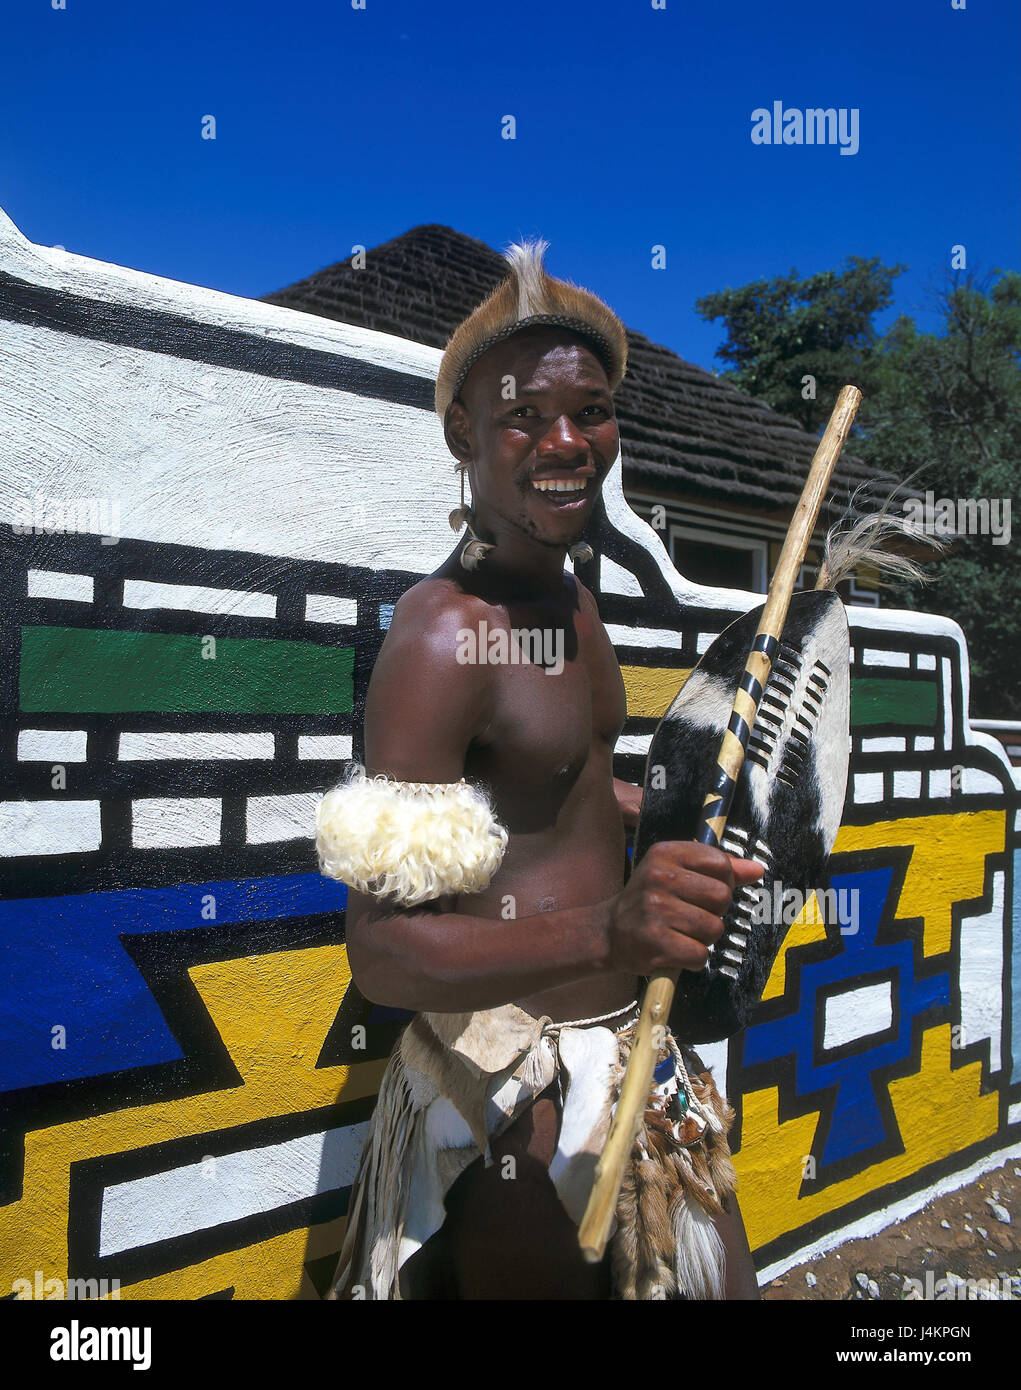 South Africa, Lesedi, defensive wall, paints, Zulu's warriors, half portrait no model release Africa, close Johannesburg, tribe, Zulu tribe, local, non-white, African, warrior, headgear, loincloth, laugh, happily, tradition, folklore, tourist attraction Stock Photo